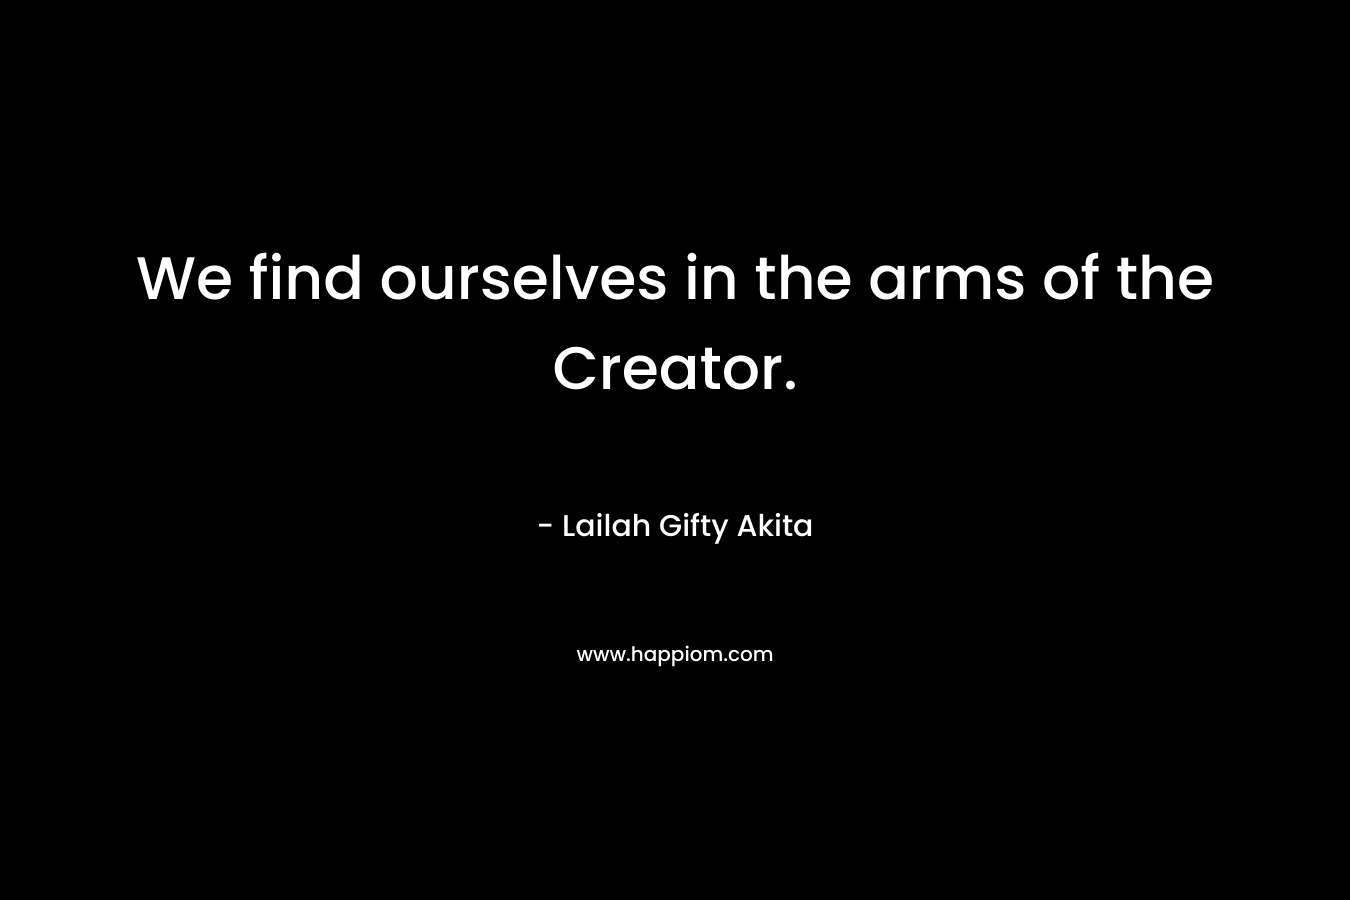 We find ourselves in the arms of the Creator.